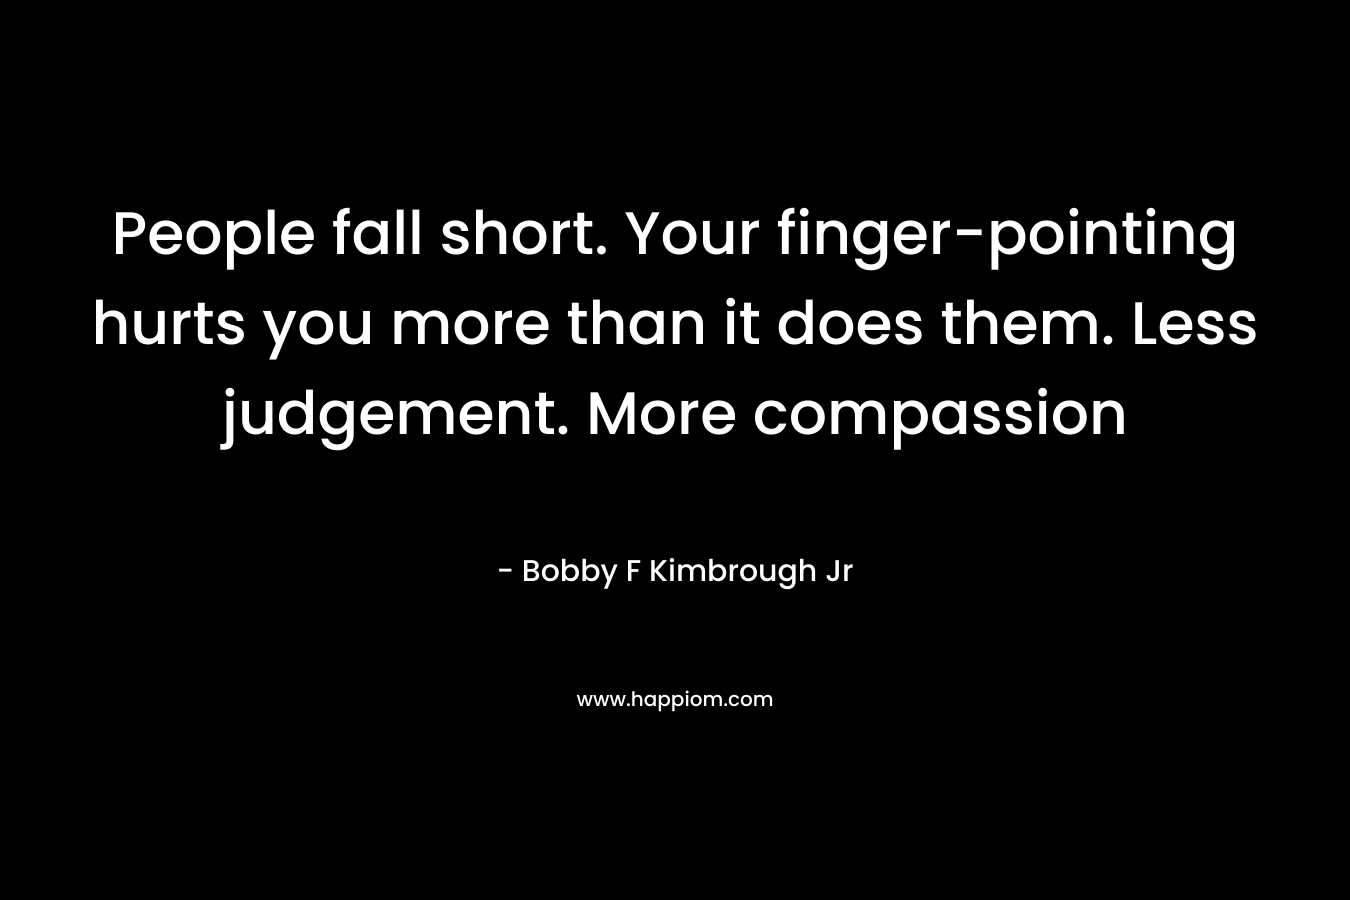 People fall short. Your finger-pointing hurts you more than it does them. Less judgement. More compassion